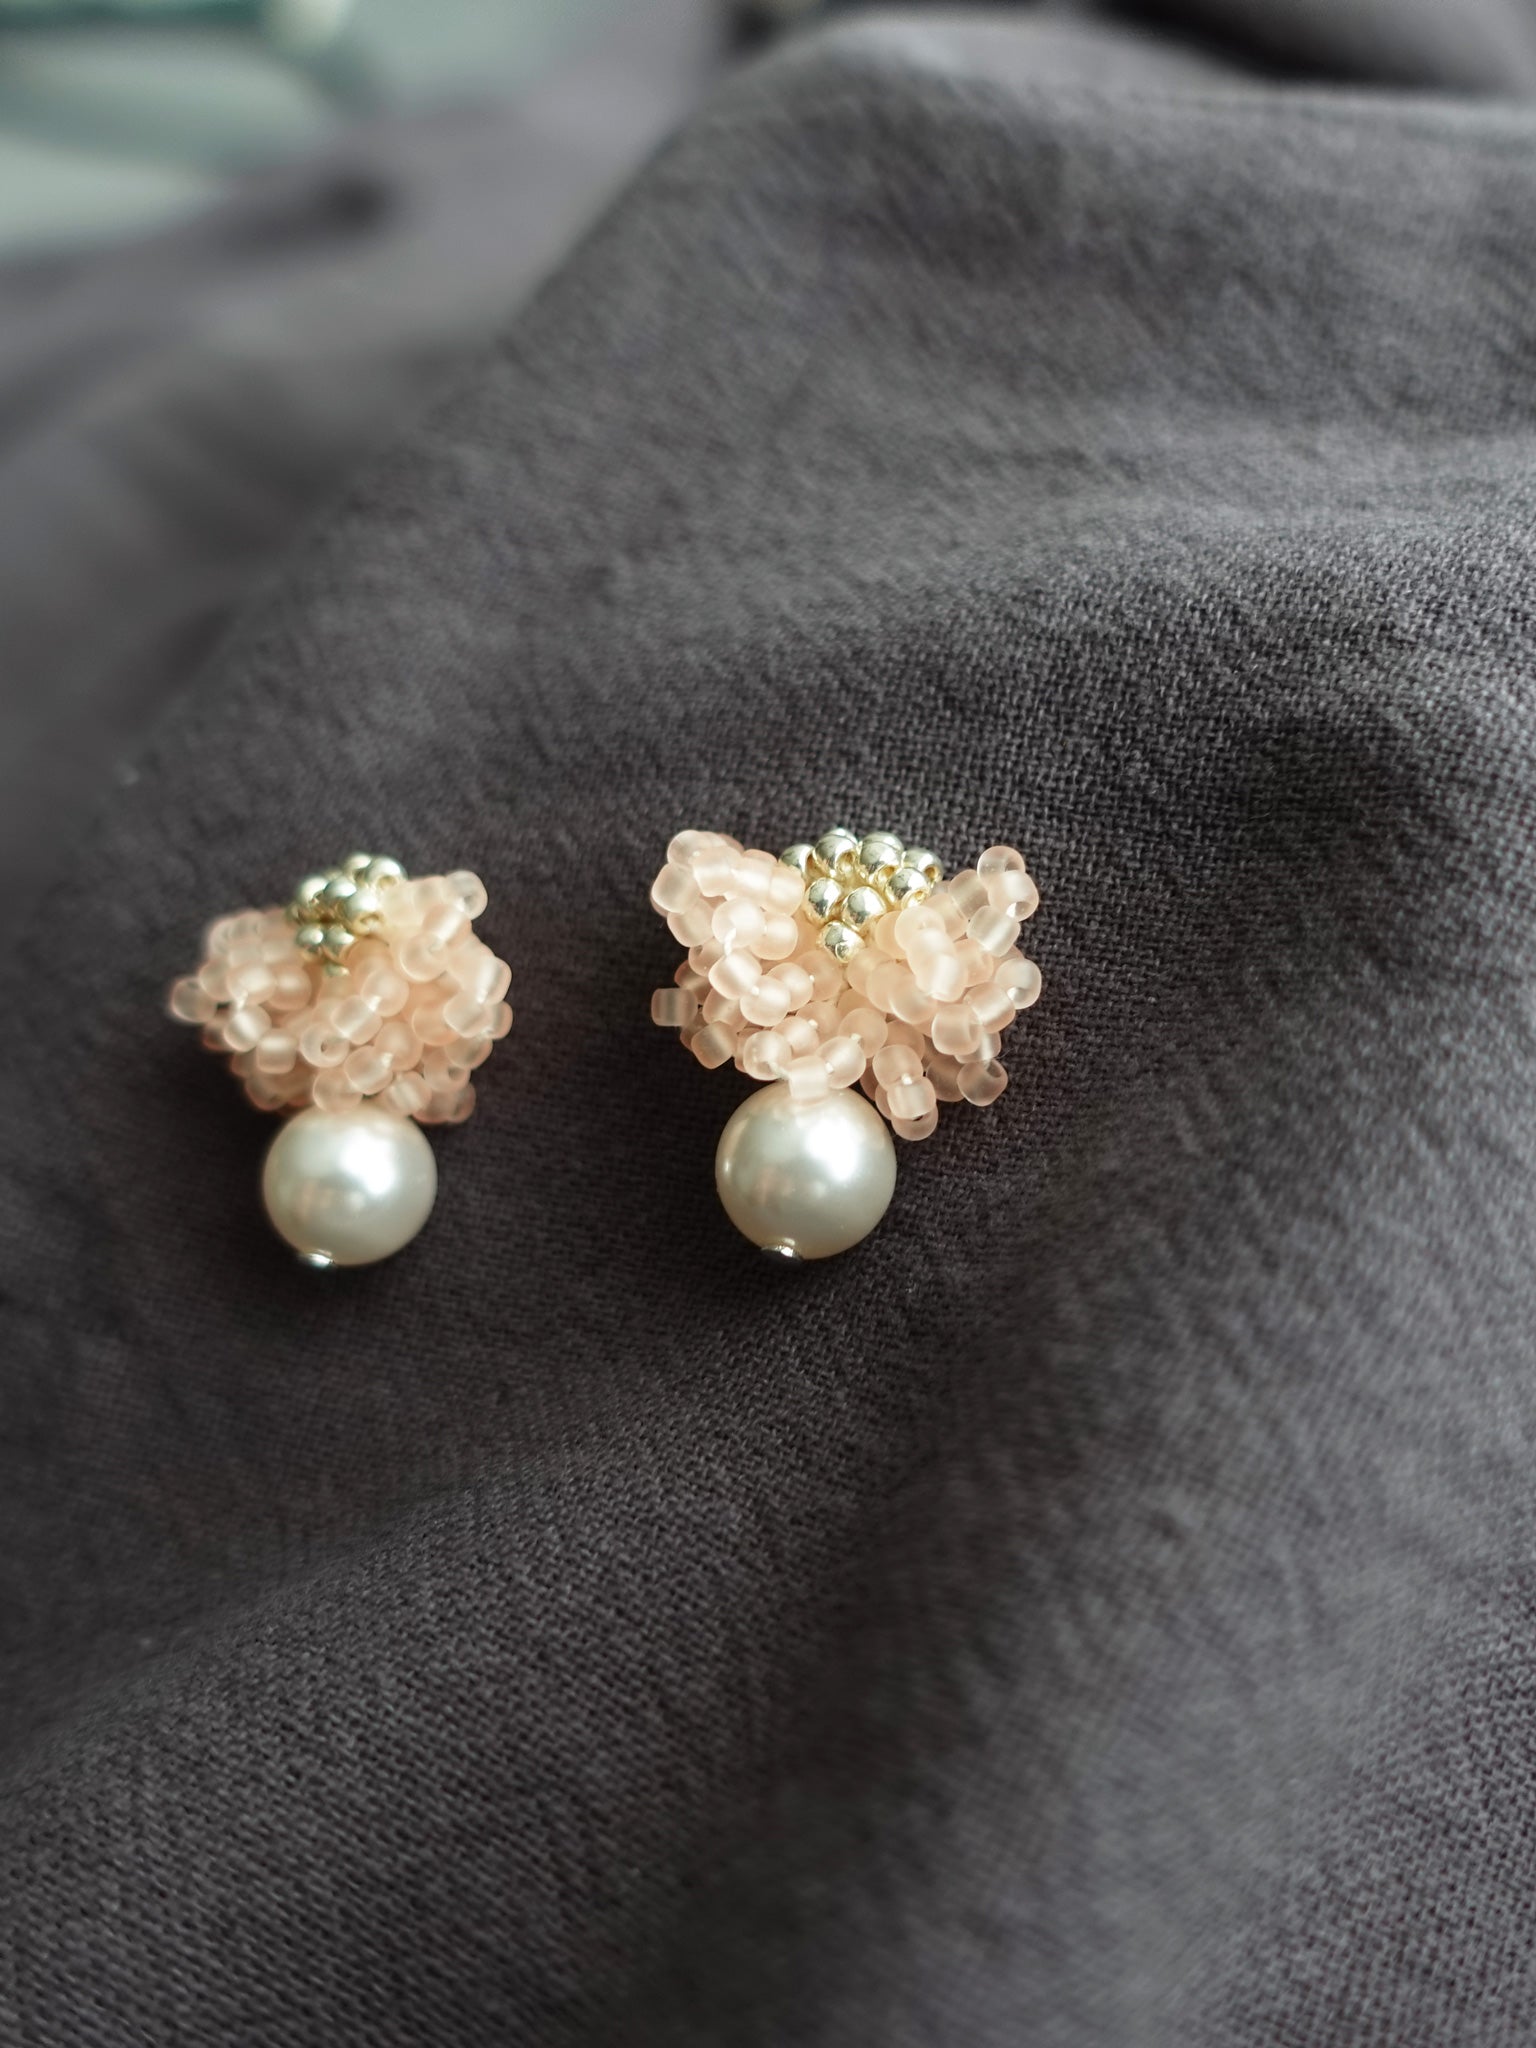 Camellia Mariota Earrings in Blush Pink Right